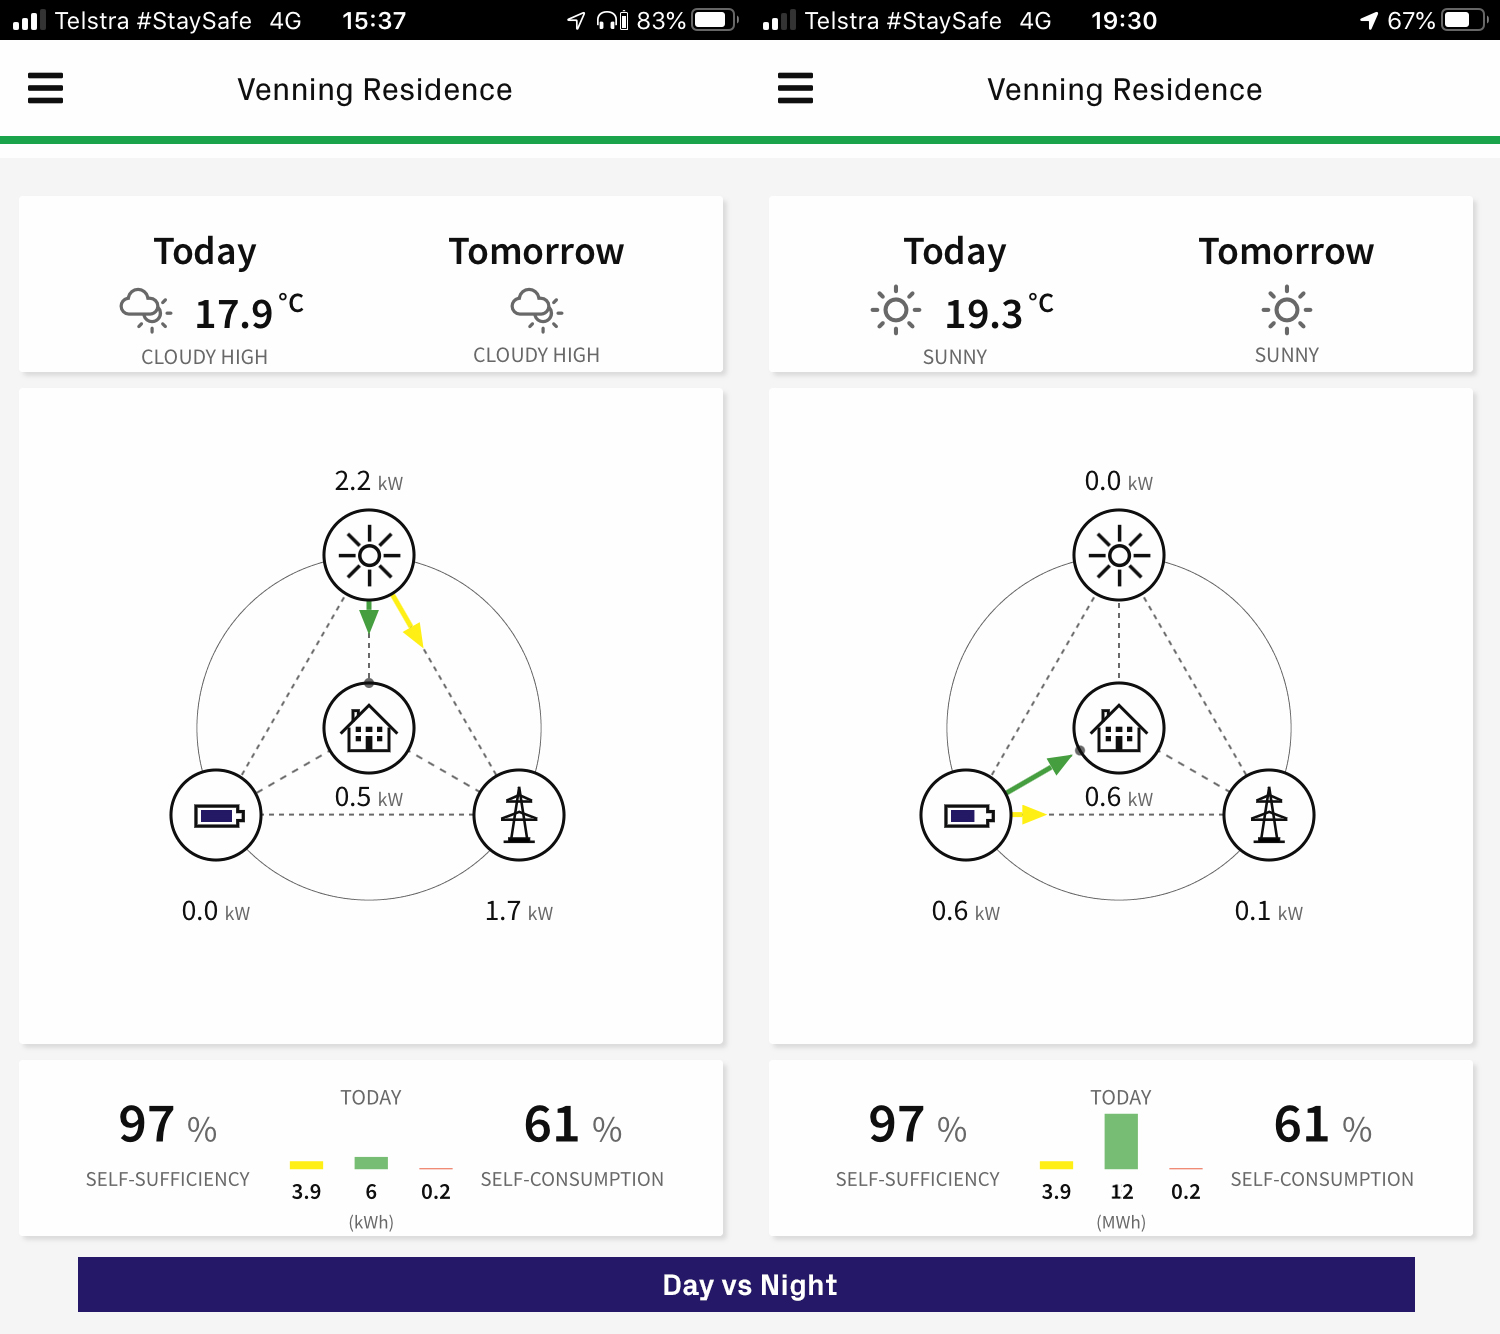 FIMER Energy Viewer App day vs night consumption view